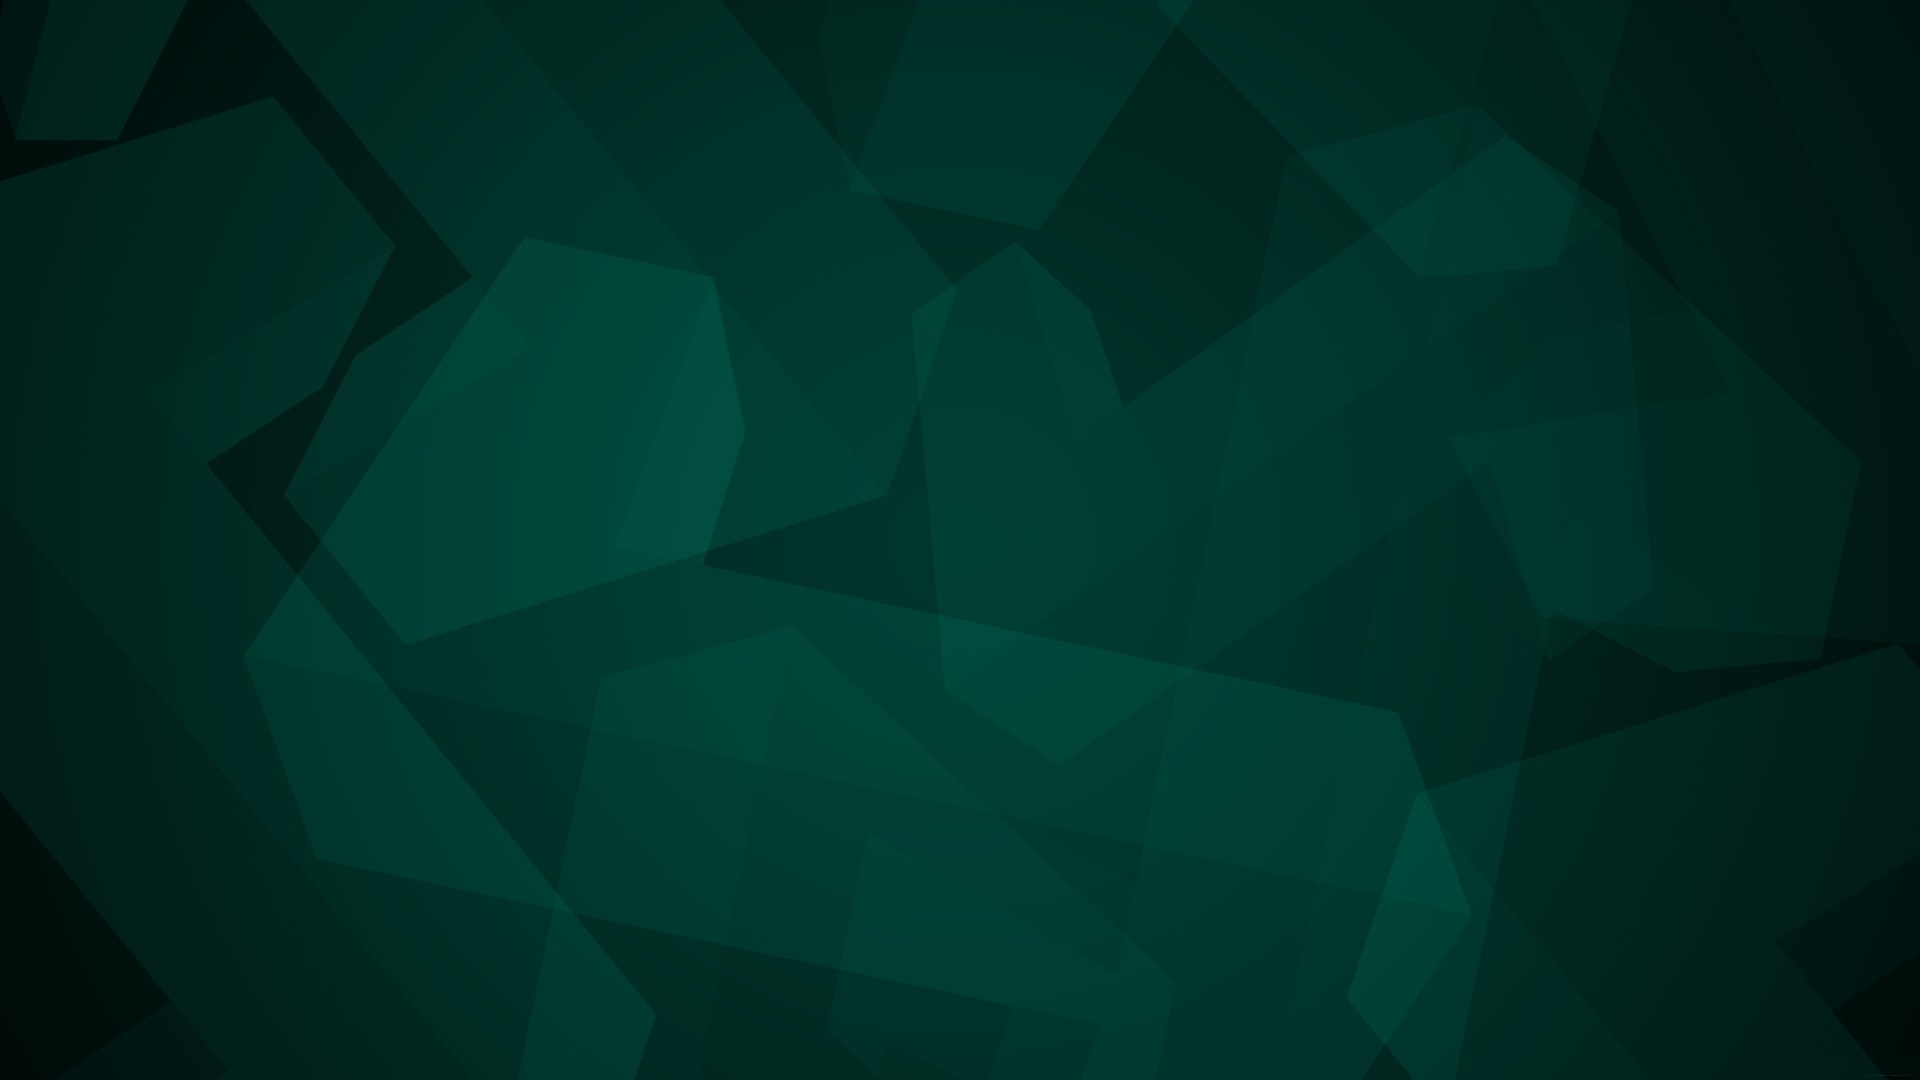 Download wallpaper dark green, minimalism, geometry, Abstraction, figure, section abstraction in resolution 1920x1080